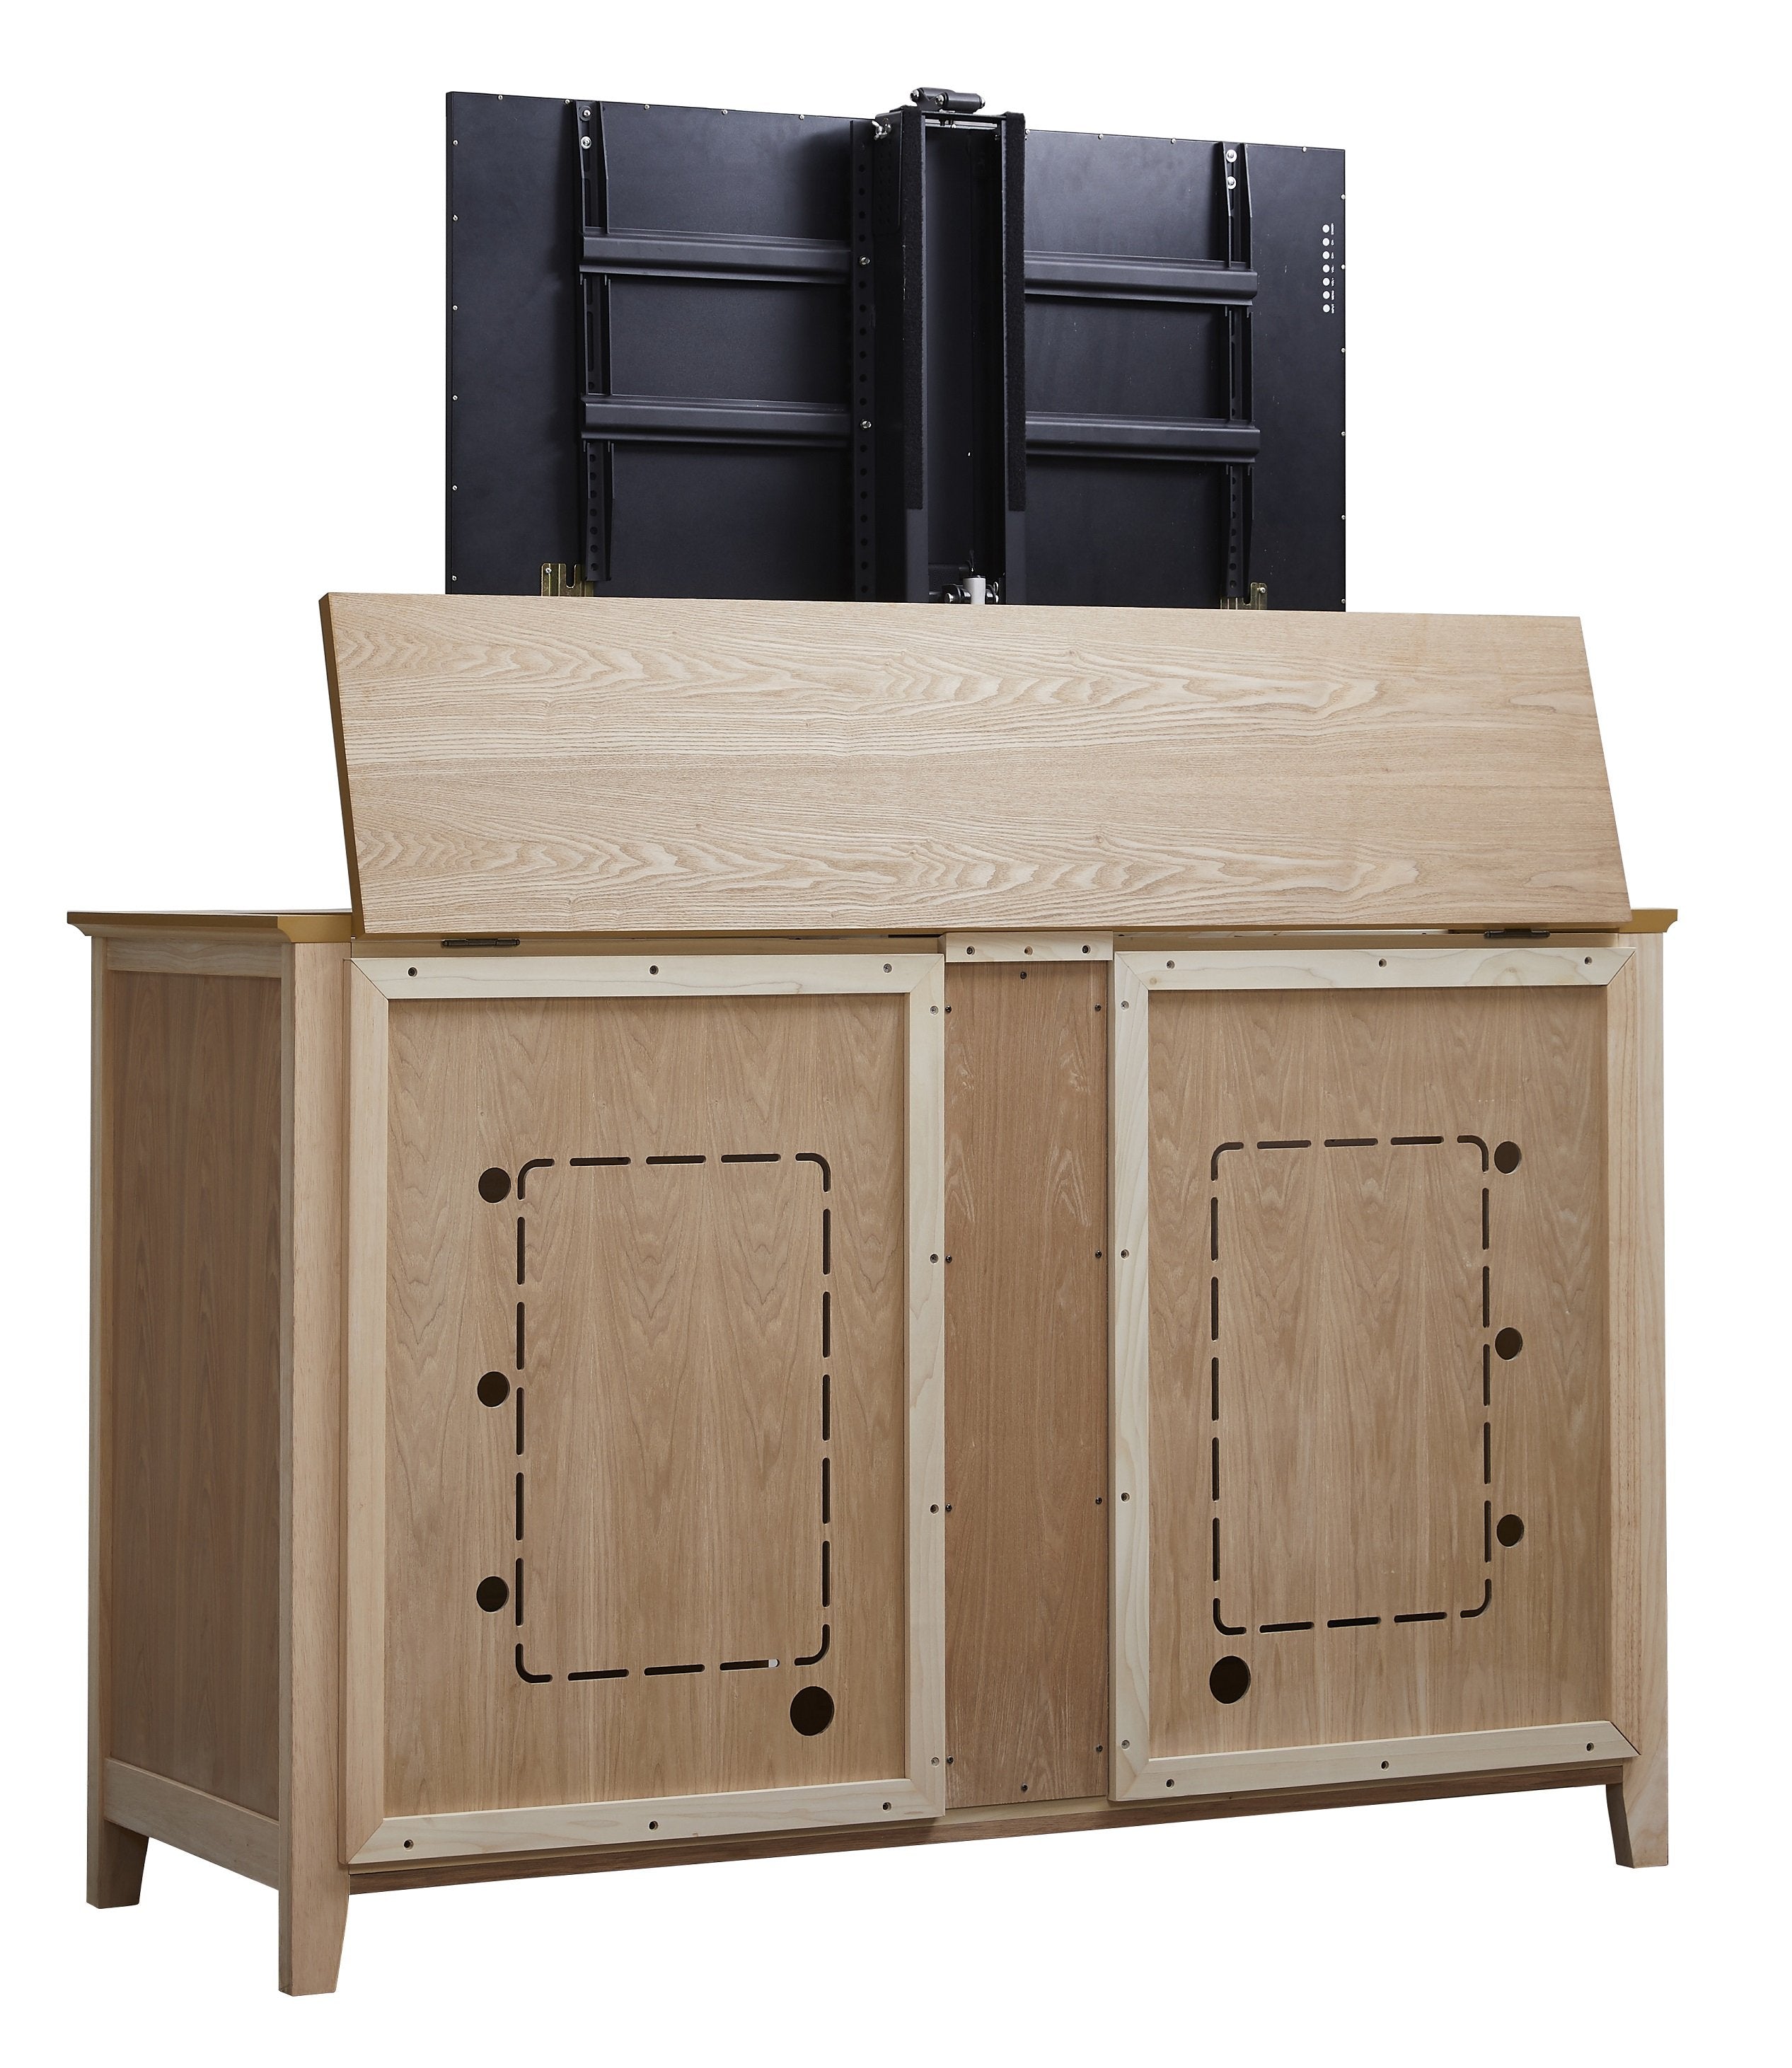 	The Claymont Unfinished 70163 TV Lift Cabinet for 65 inch Flat screen TVs from the back.